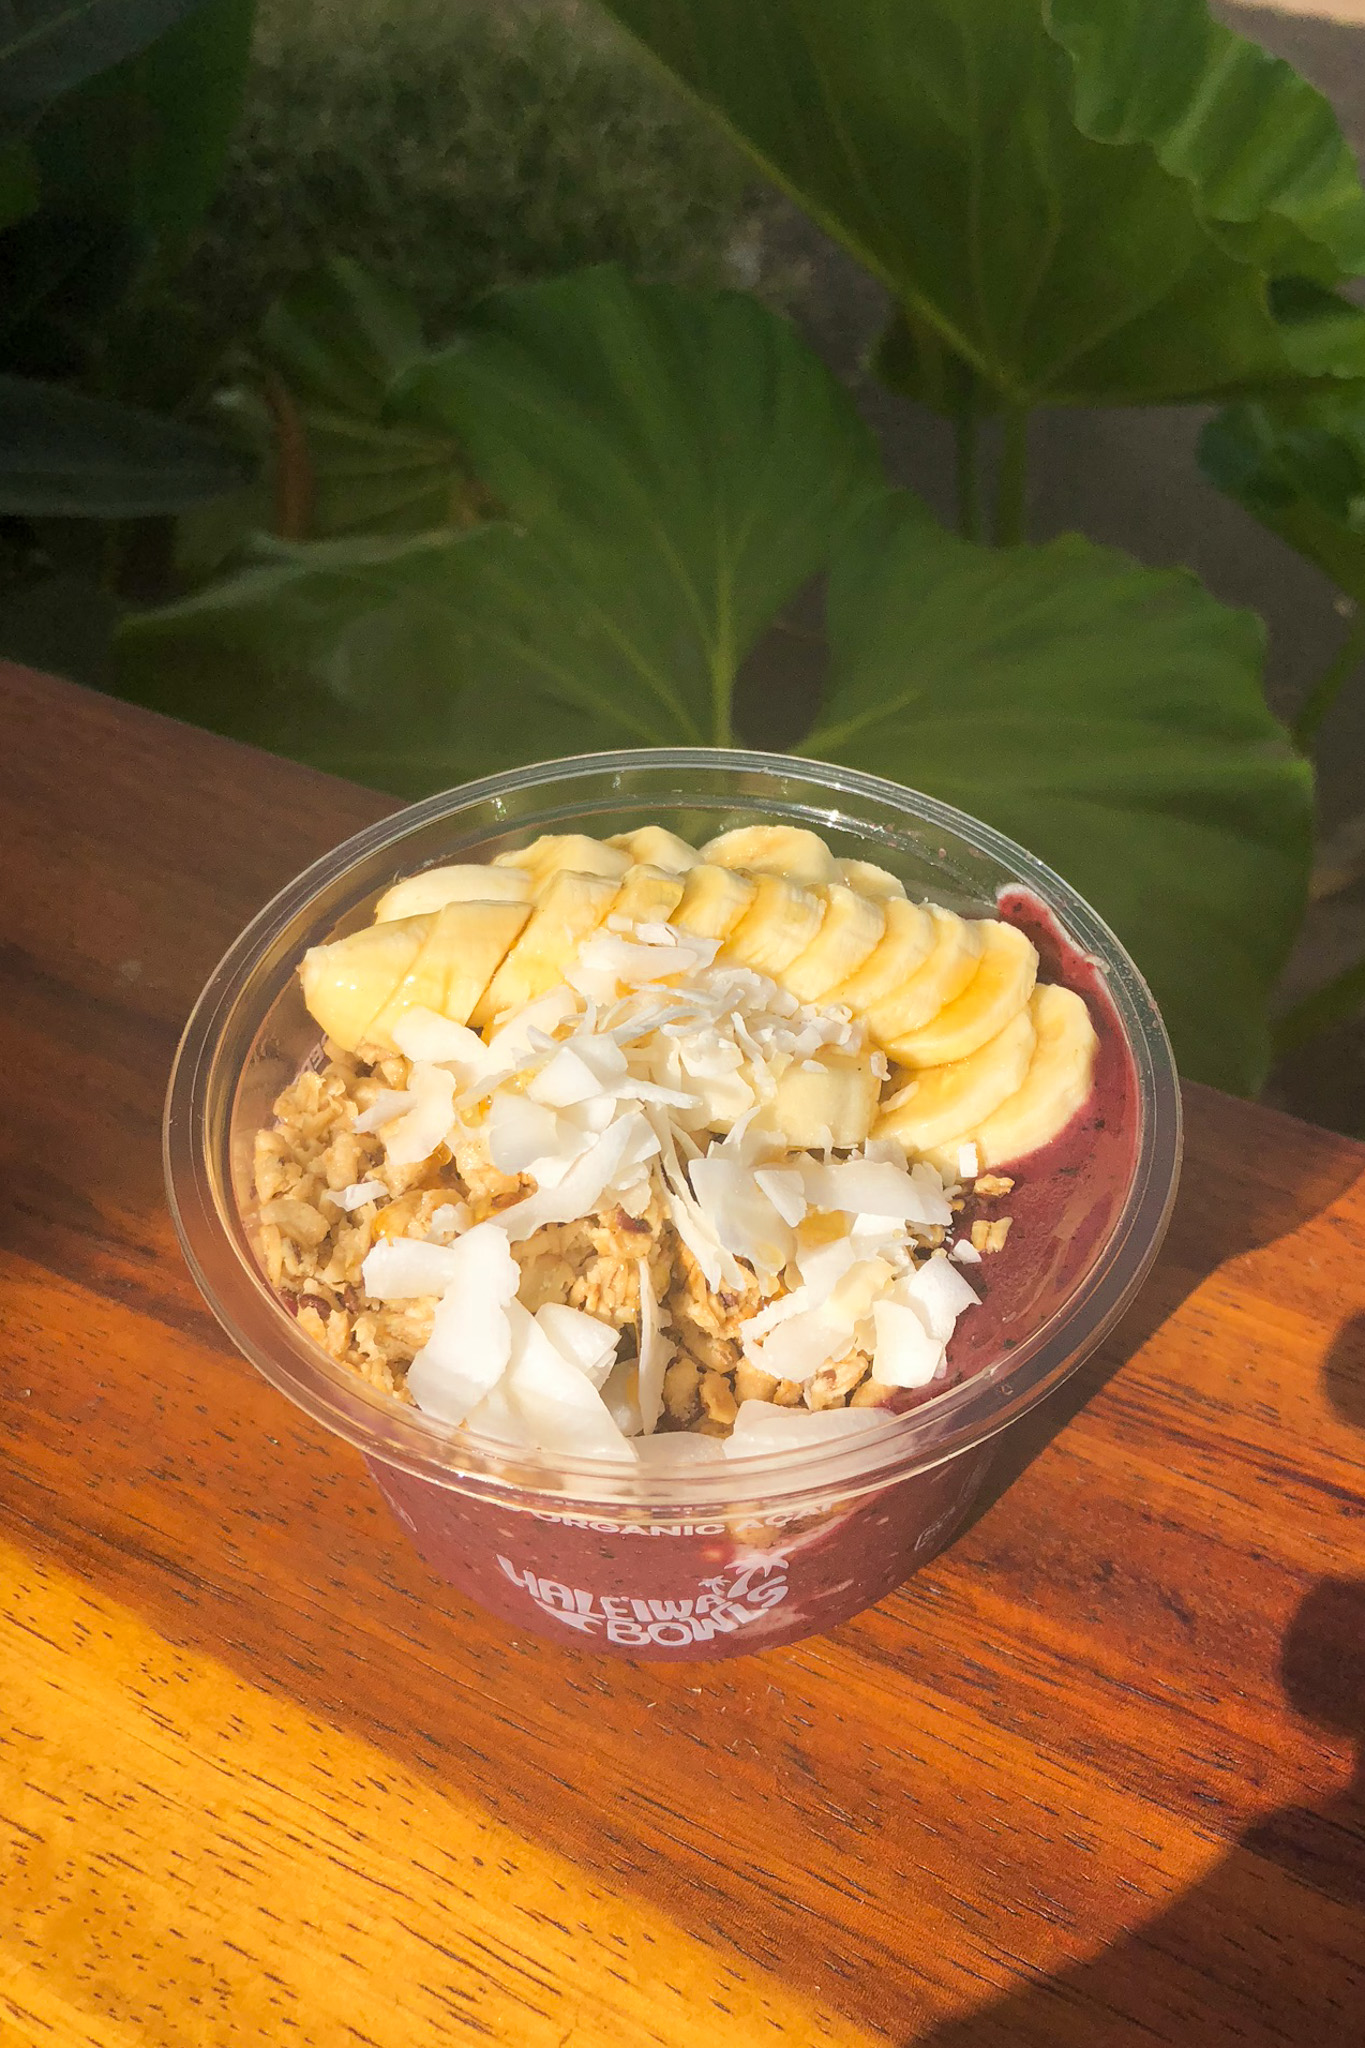 Acai bowl topped with fruit and granola from Haleiwa Bowls on Oahu's North Shore